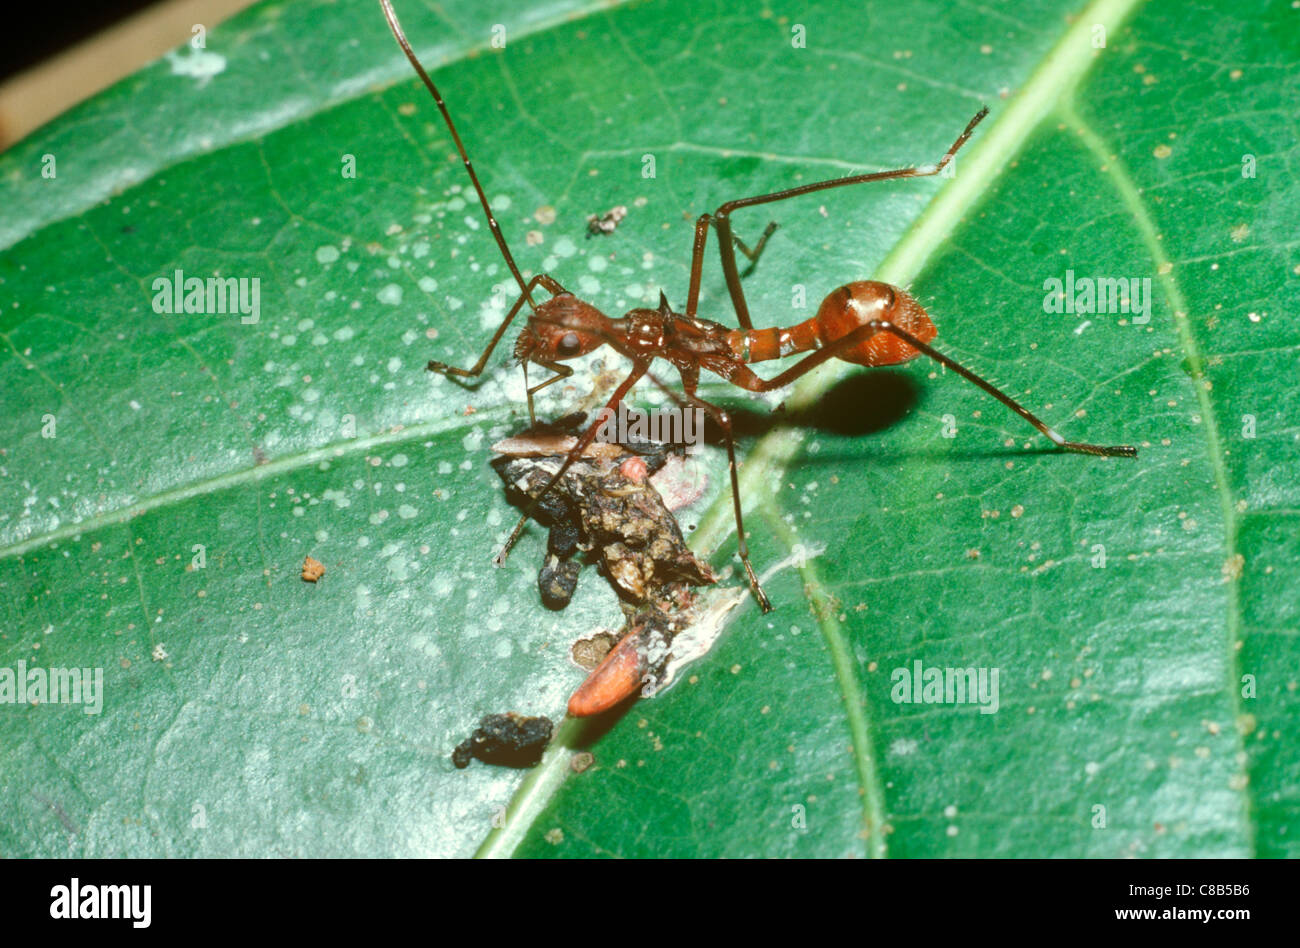 Broad-headed bug (Hyalymenus sp.: Alydidae) nymph, mimicking an ant, feeding from a bird-dropping, in rainforest Peru Stock Photo